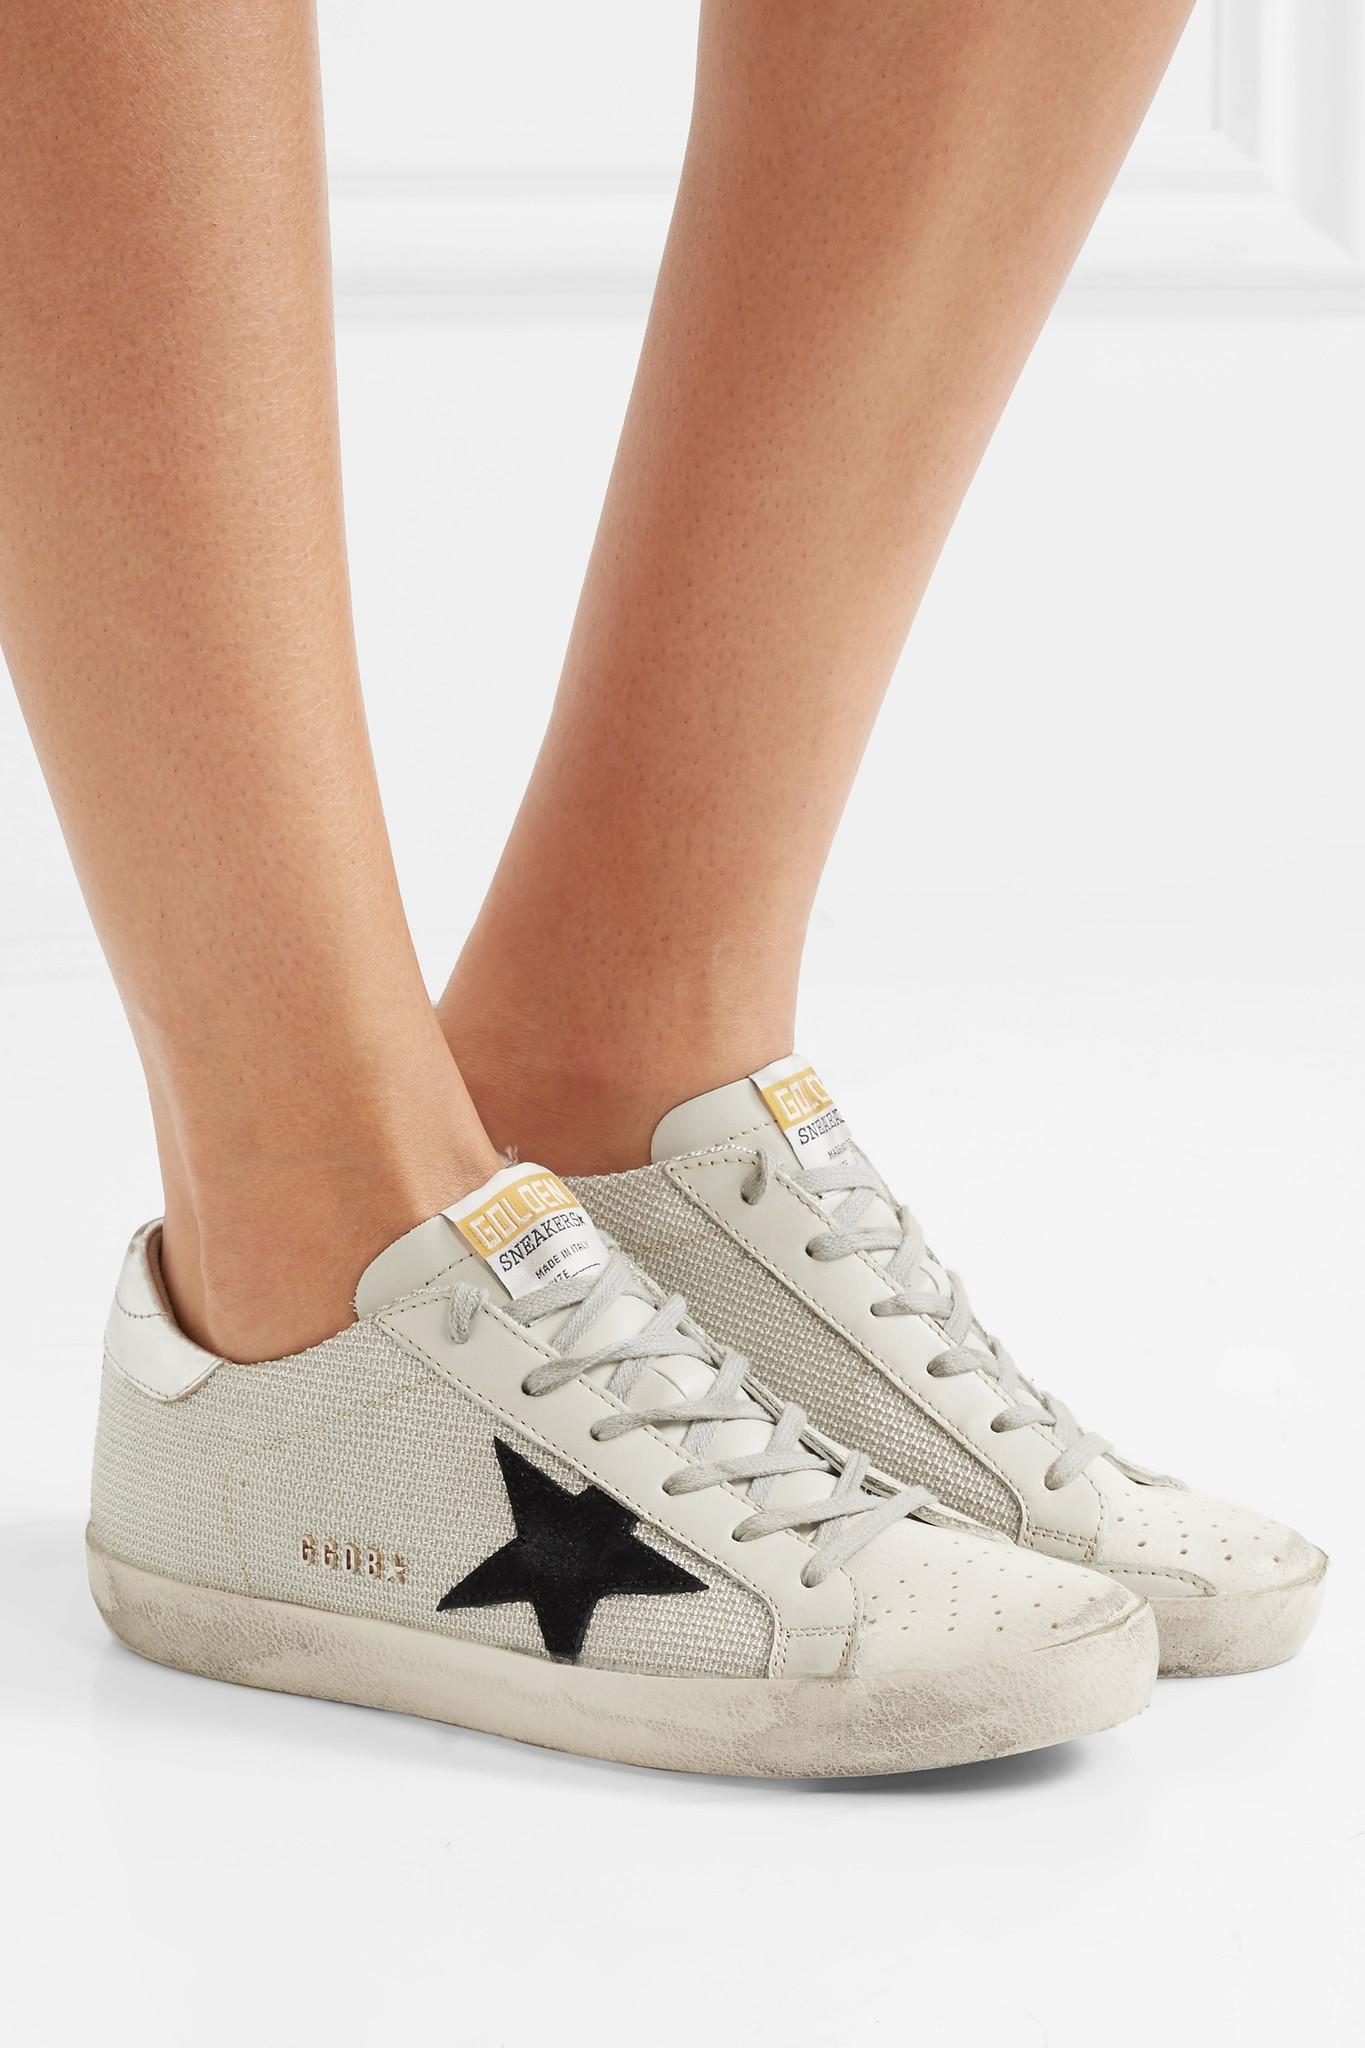 Golden Goose Deluxe Brand Goose Super Star Distressed Leather-paneled